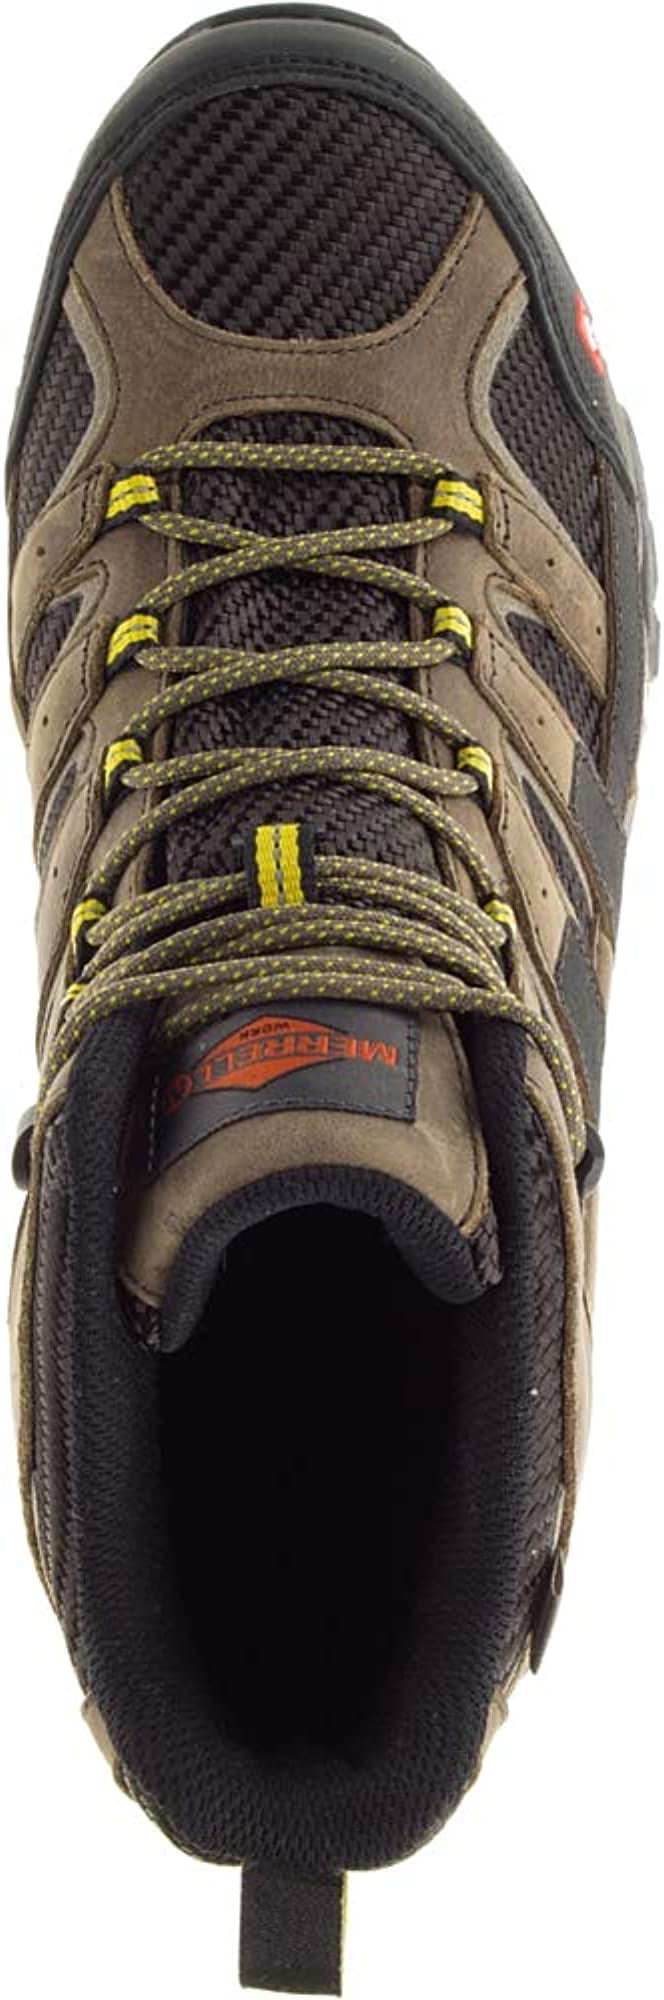 Merrell J15753 Moab 2 Composite Safety Steel Toe Waterproof Work BOOTS Mens 9 for sale online 